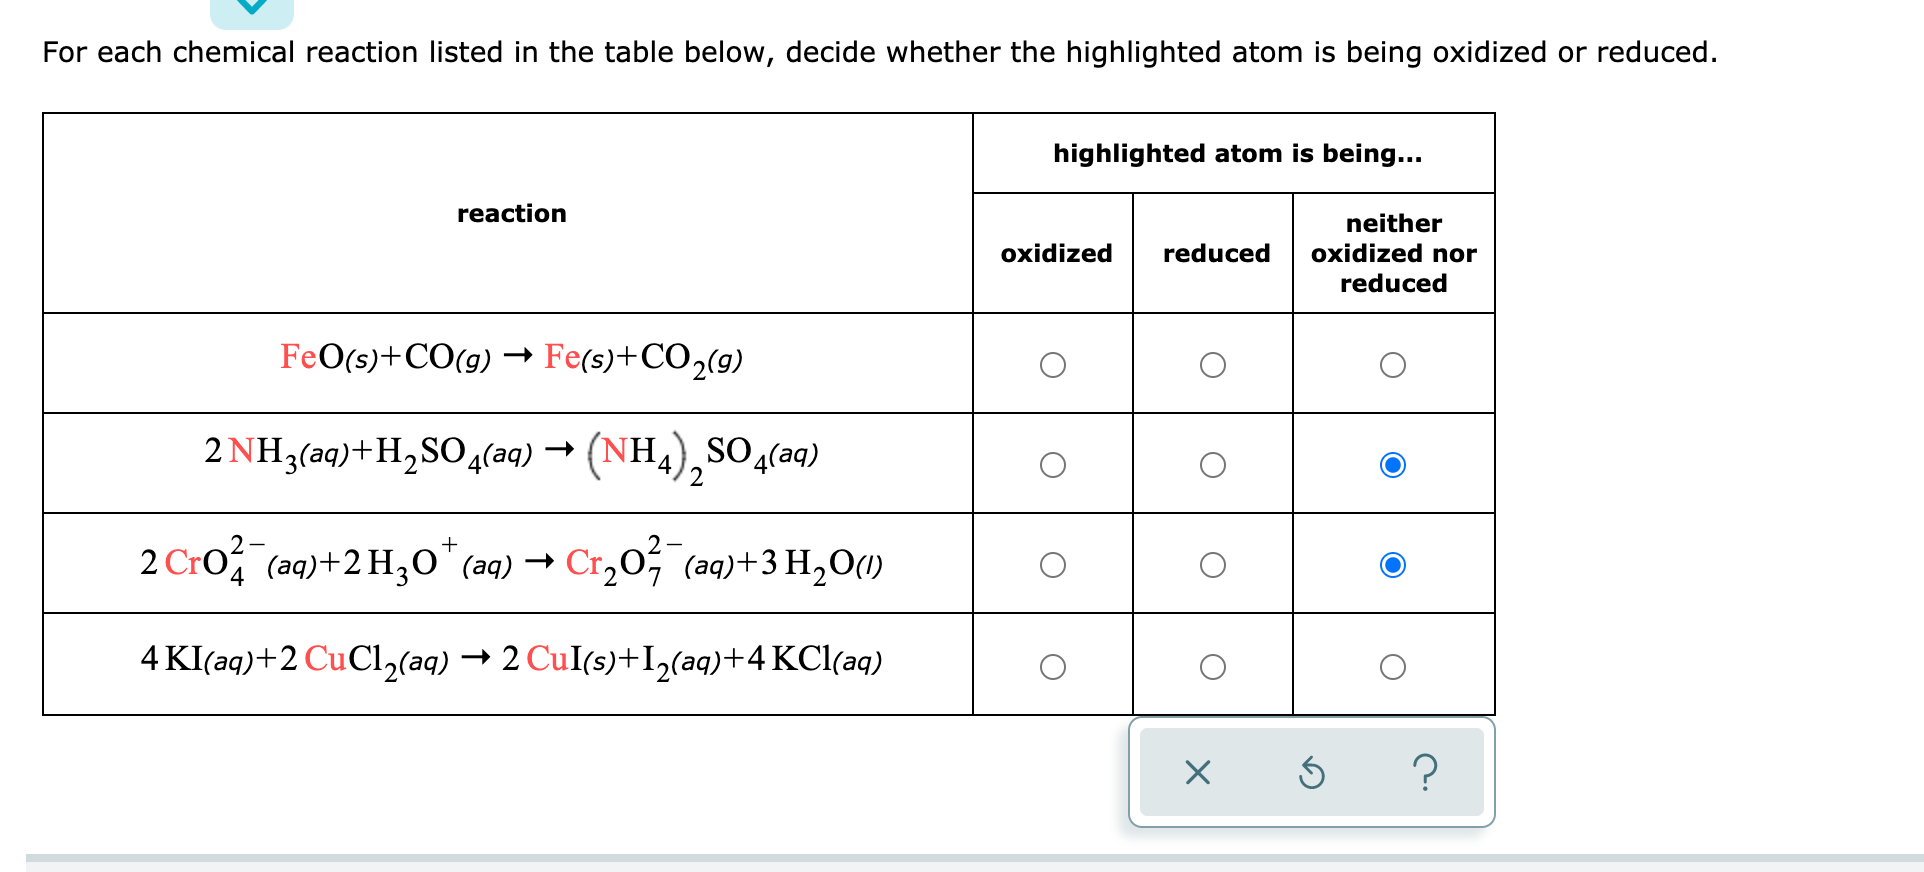 For each chemical reaction listed in the table below, decide whether the highlighted atom is being oxidized or reduced.
highlighted atom is being...
reaction
neither
oxidized
reduced
oxidized nor
reduced
FeO(s)+CO(g) Fe(s)+CO2(9)
2 NH3(aq)+H,SO4(aq) → (NH,),SO4(aq)
SO(aq)
2 Cro, (aq)+2 H3O"(aq) →
Cr,0, (aq)+3 H,O()
4 KI(aq)+2 CuCl2(aq) → 2 CuI(s)+I,(aq)+4 KCl(aq)
